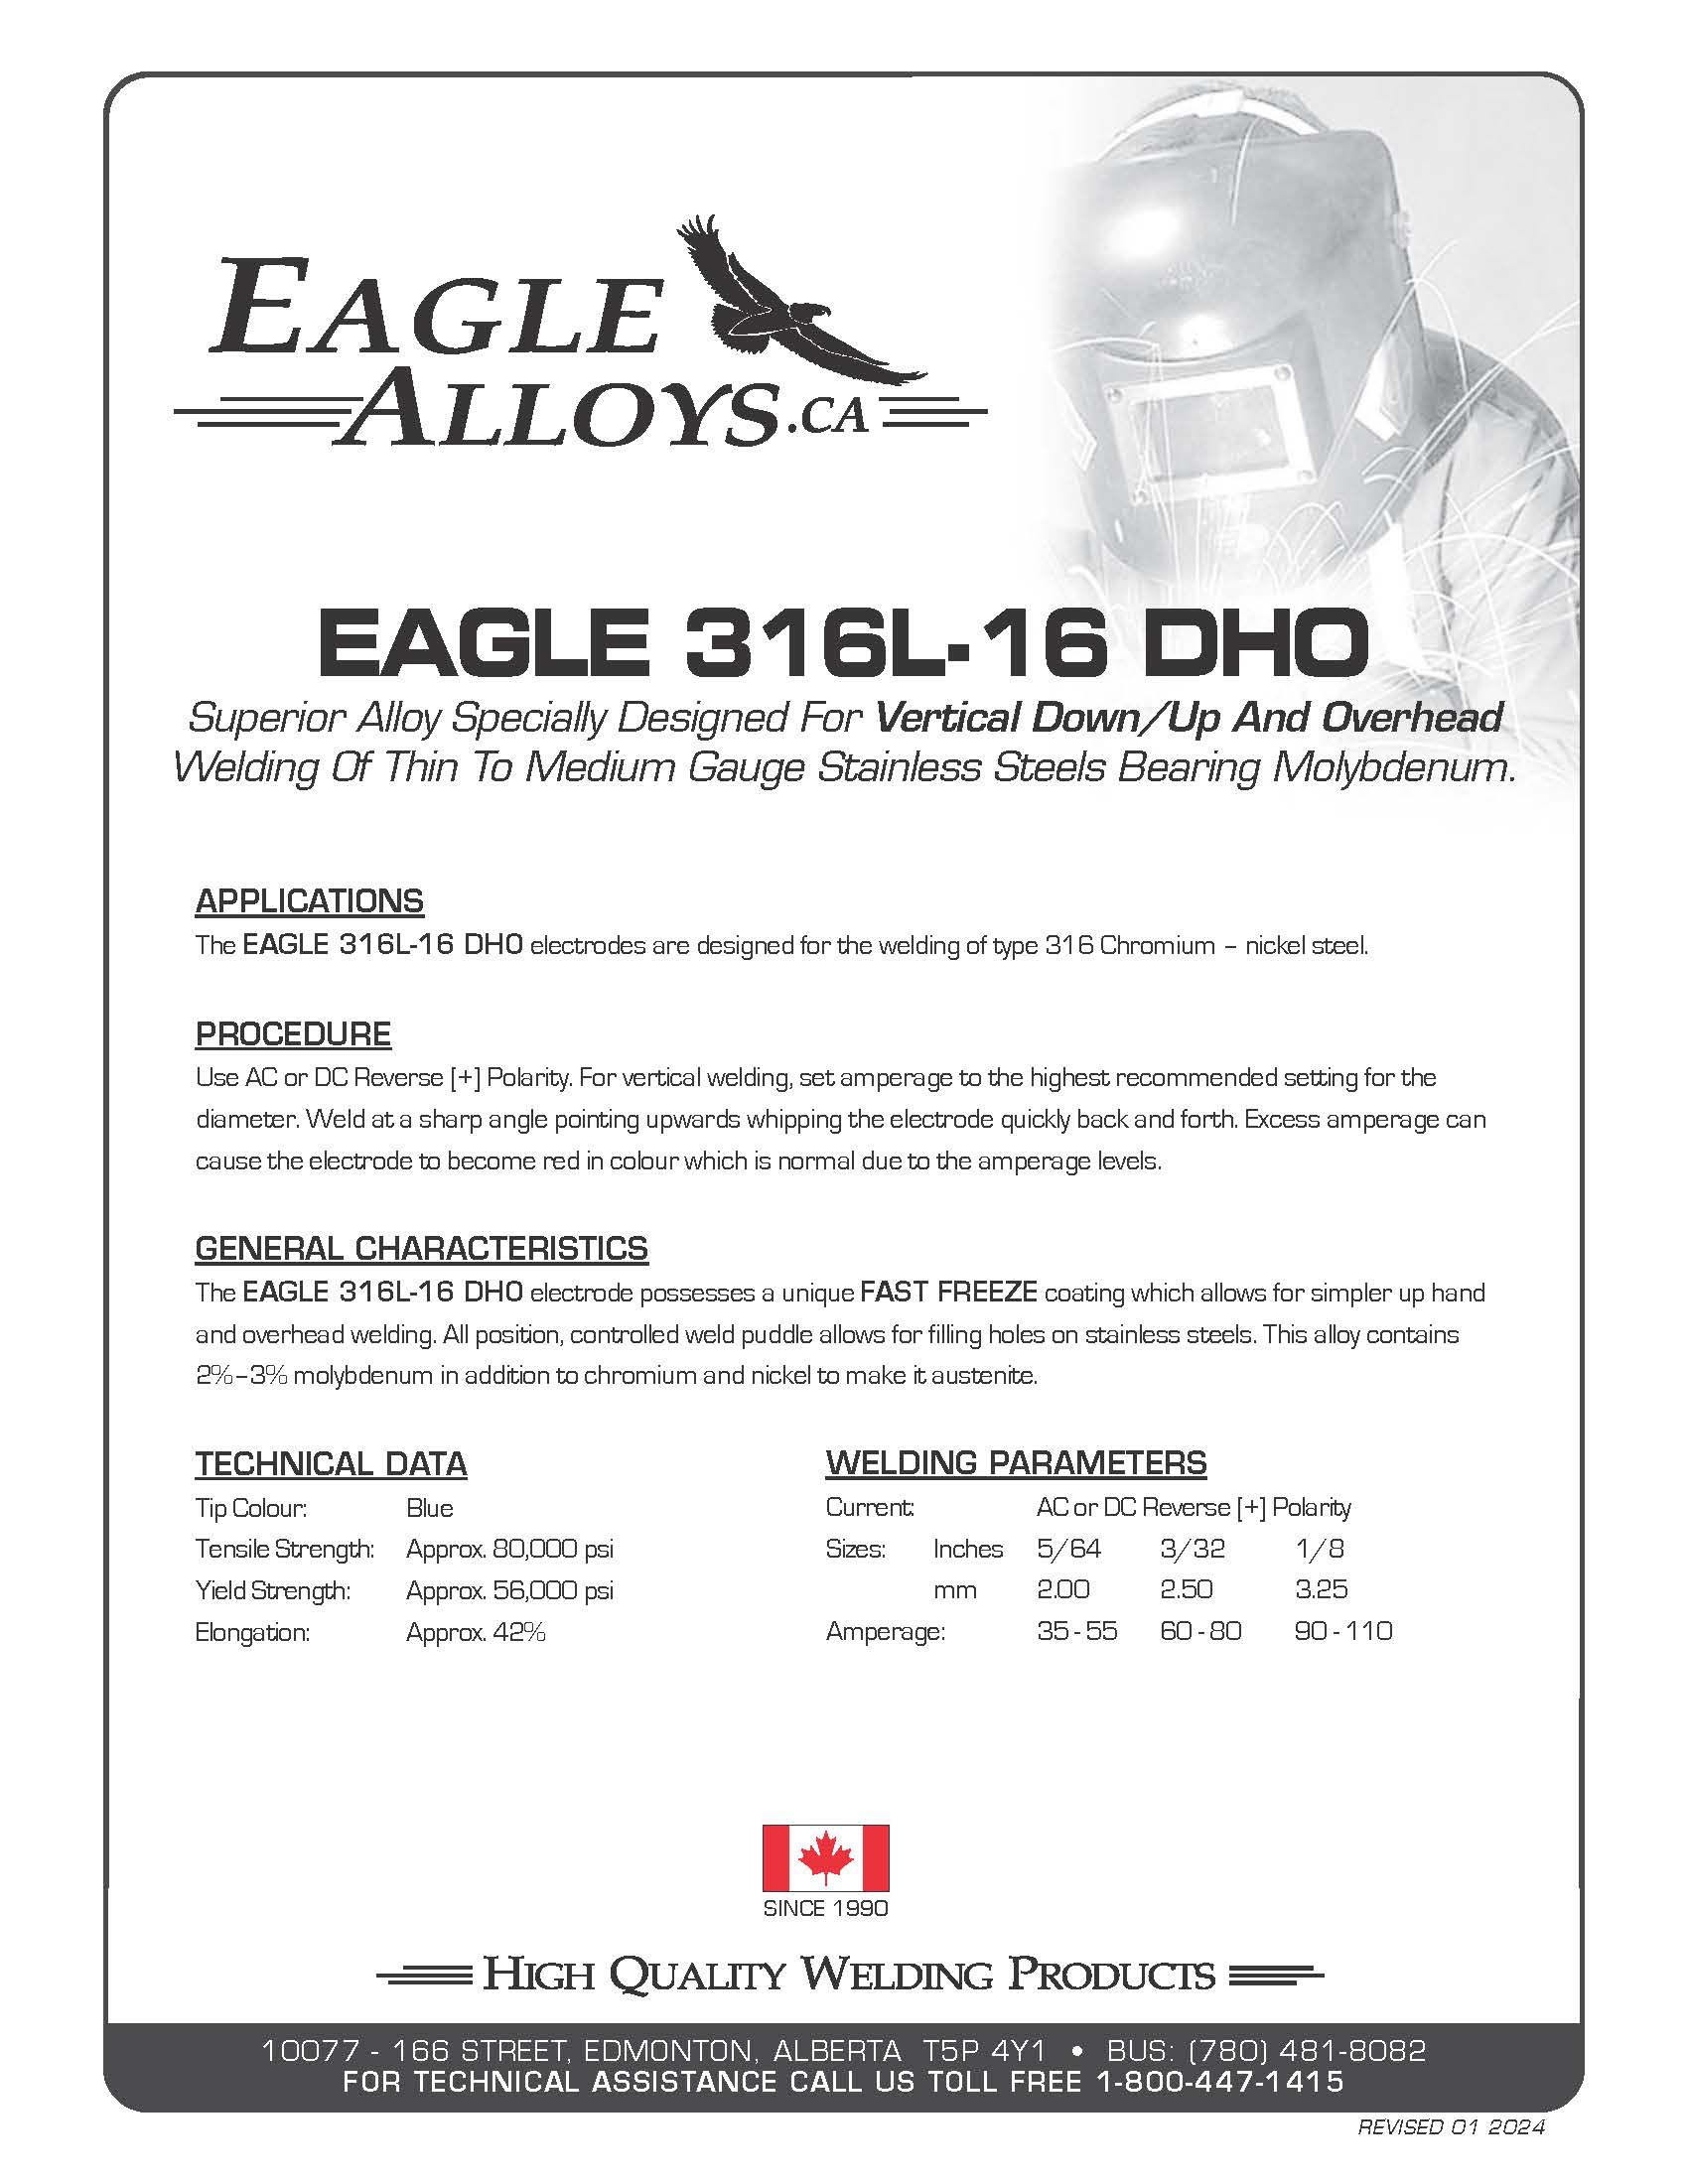 EAGLE 316L-16 DHO: Superior Alloy for Stainless Steel Welding PDF applications, procedure, welding parameters